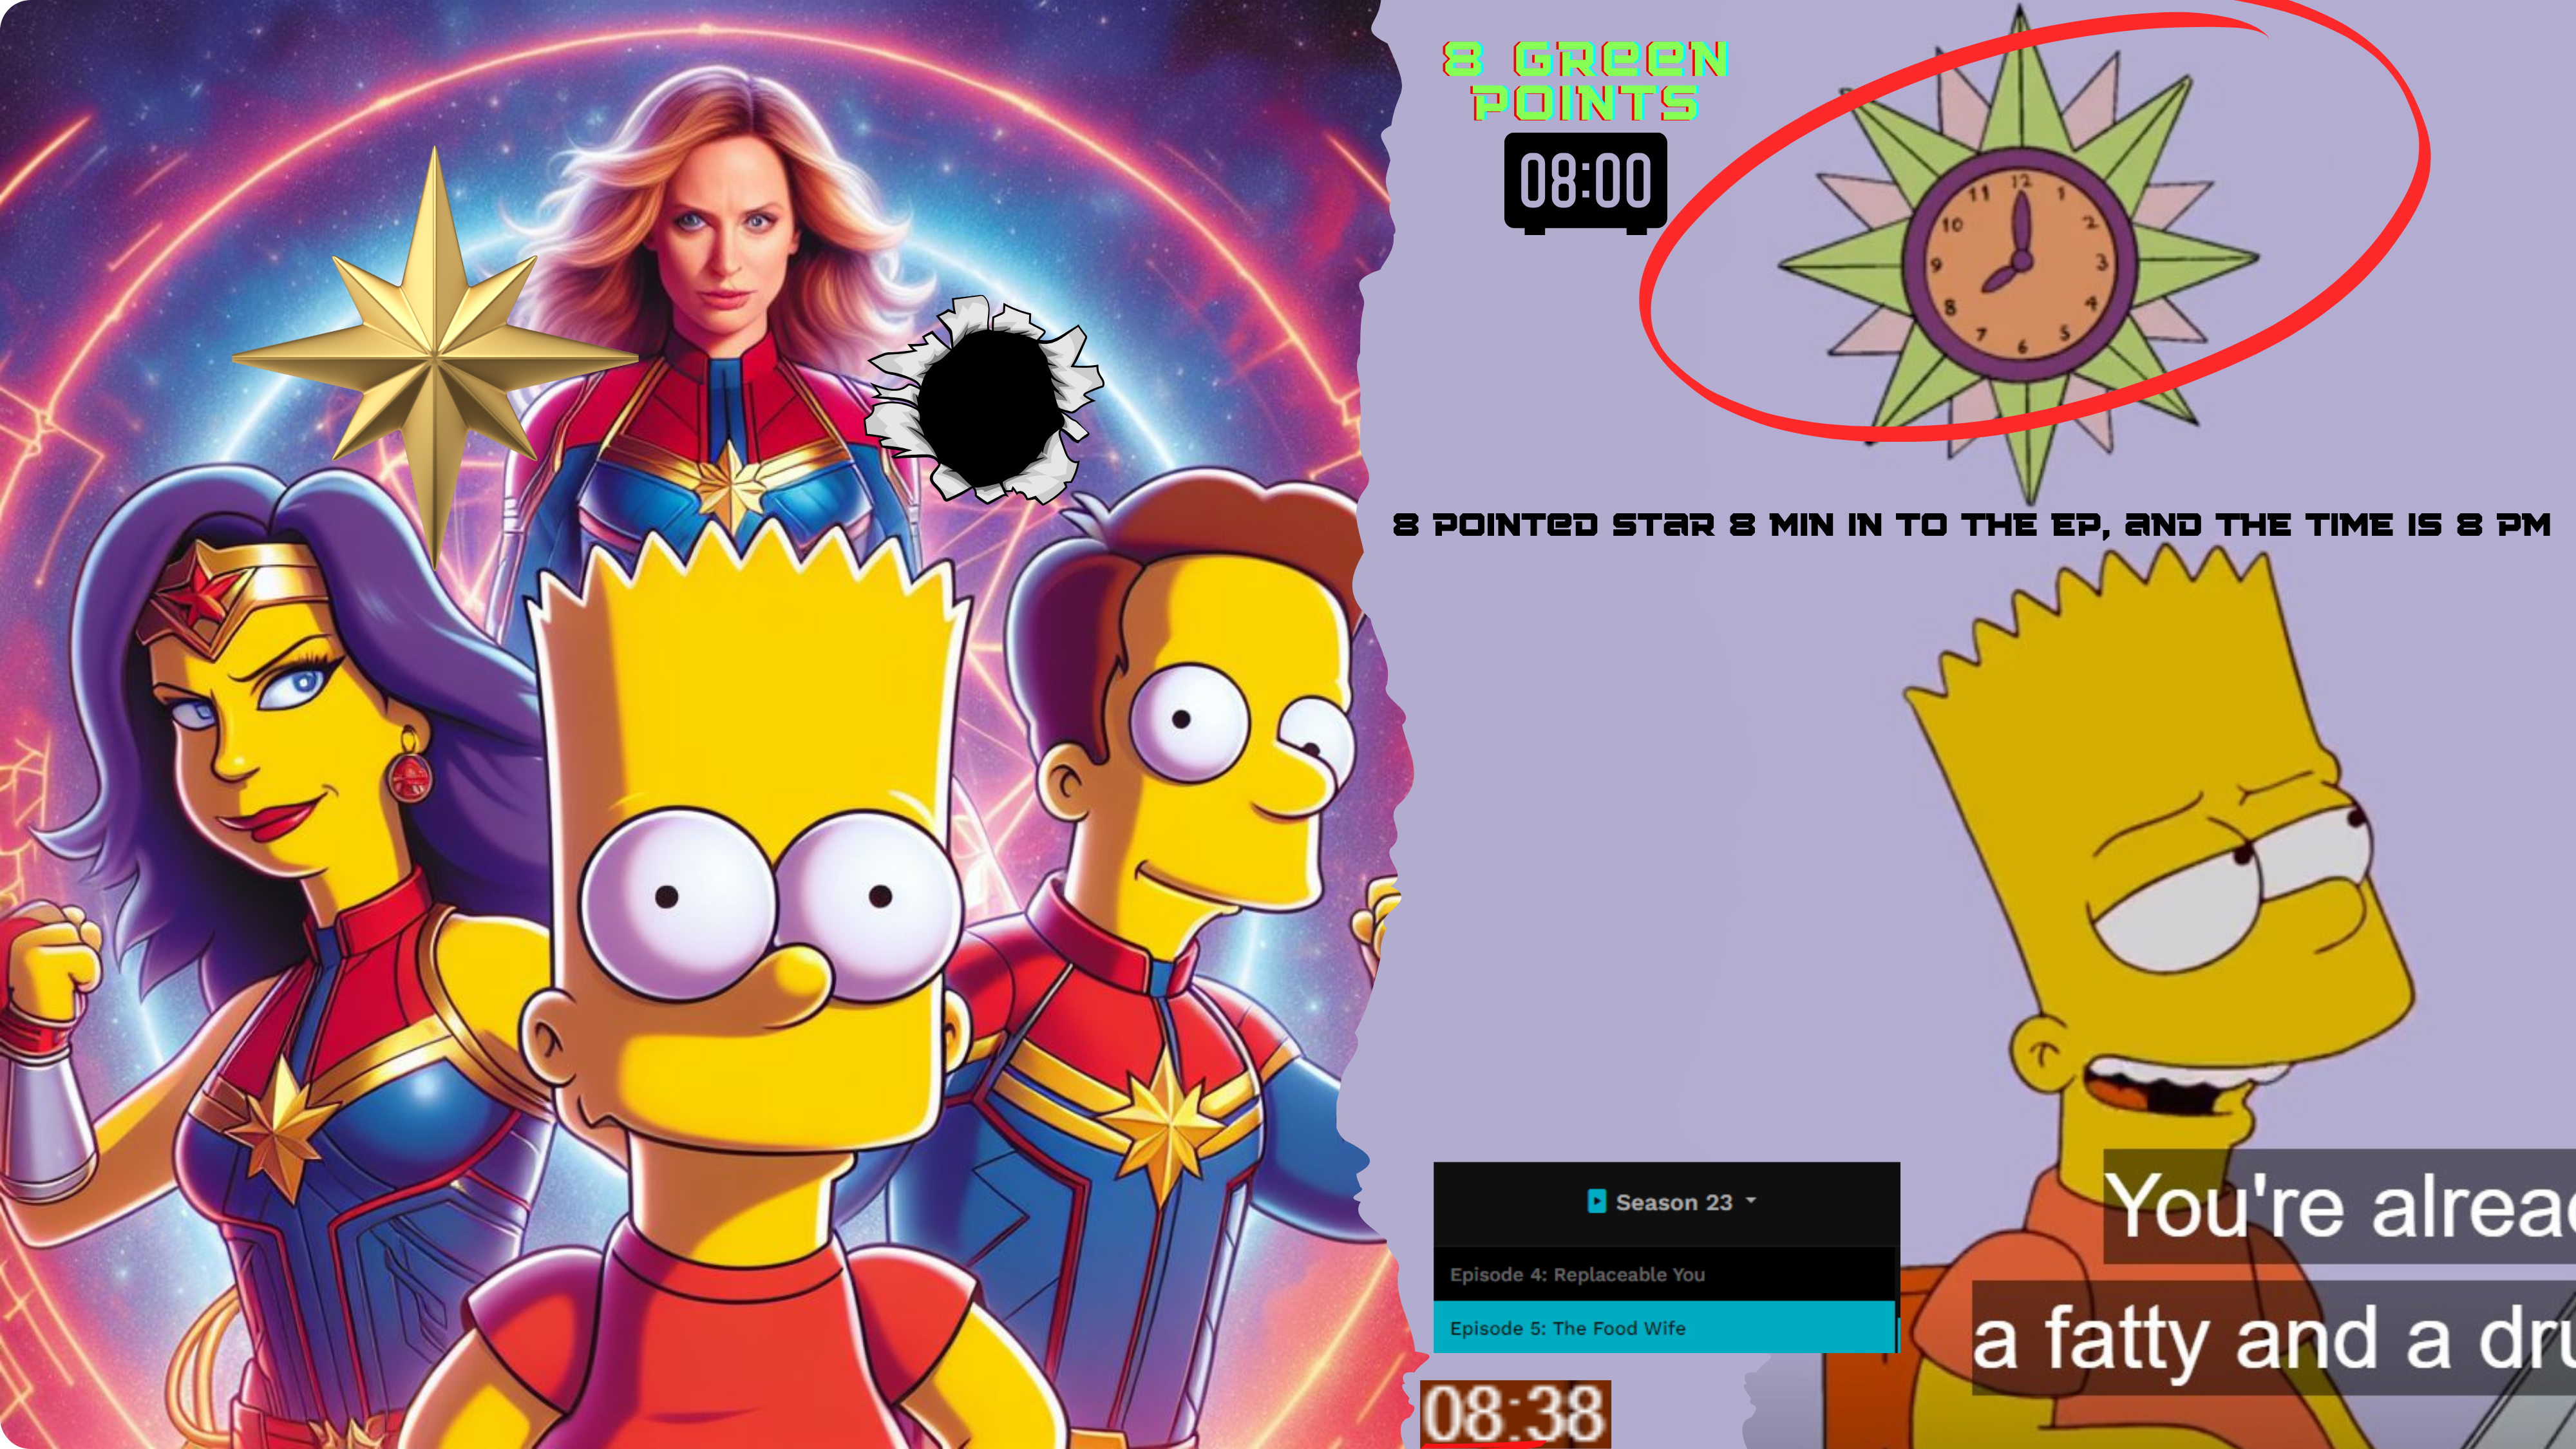 The Simpsons Season 23, Episode 5 8 Pointed Star On The Wall At Eight Minutes And 38 Seconds Into The Episode 